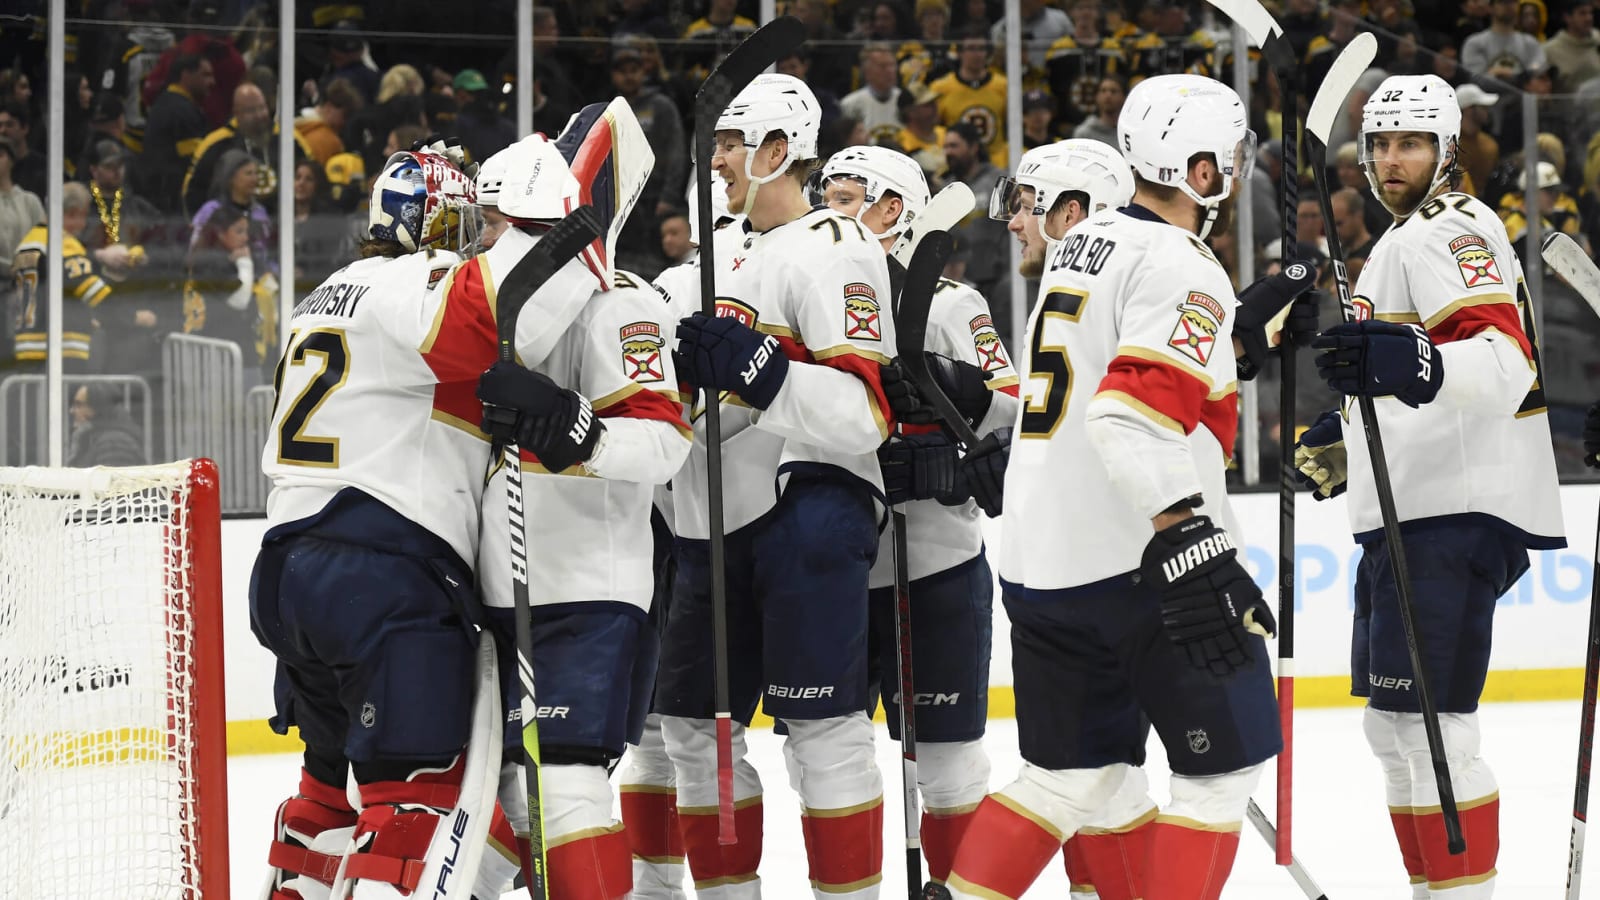 Panthers Postgame: Video After Game 4 Win Over Bruins